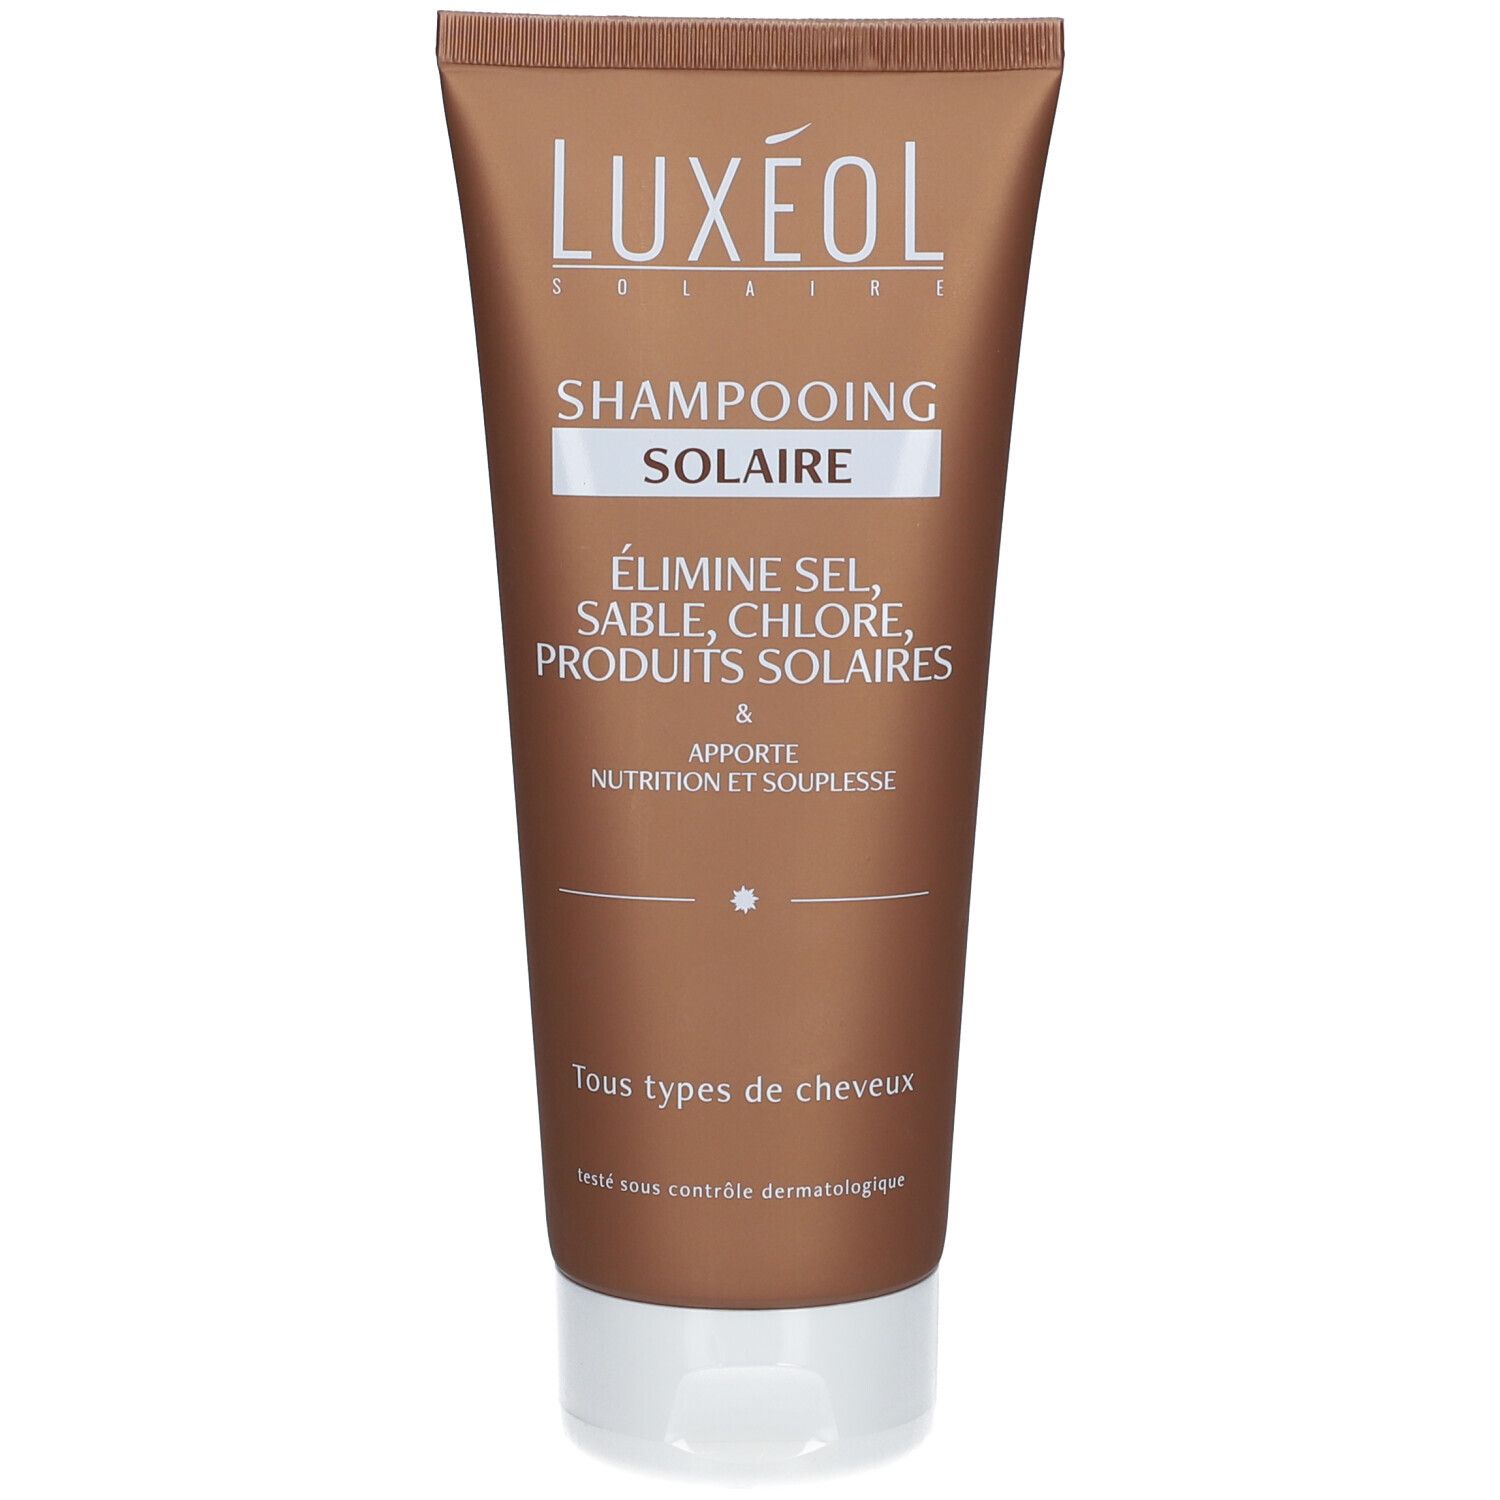 Luxéol Shampoing Solaire